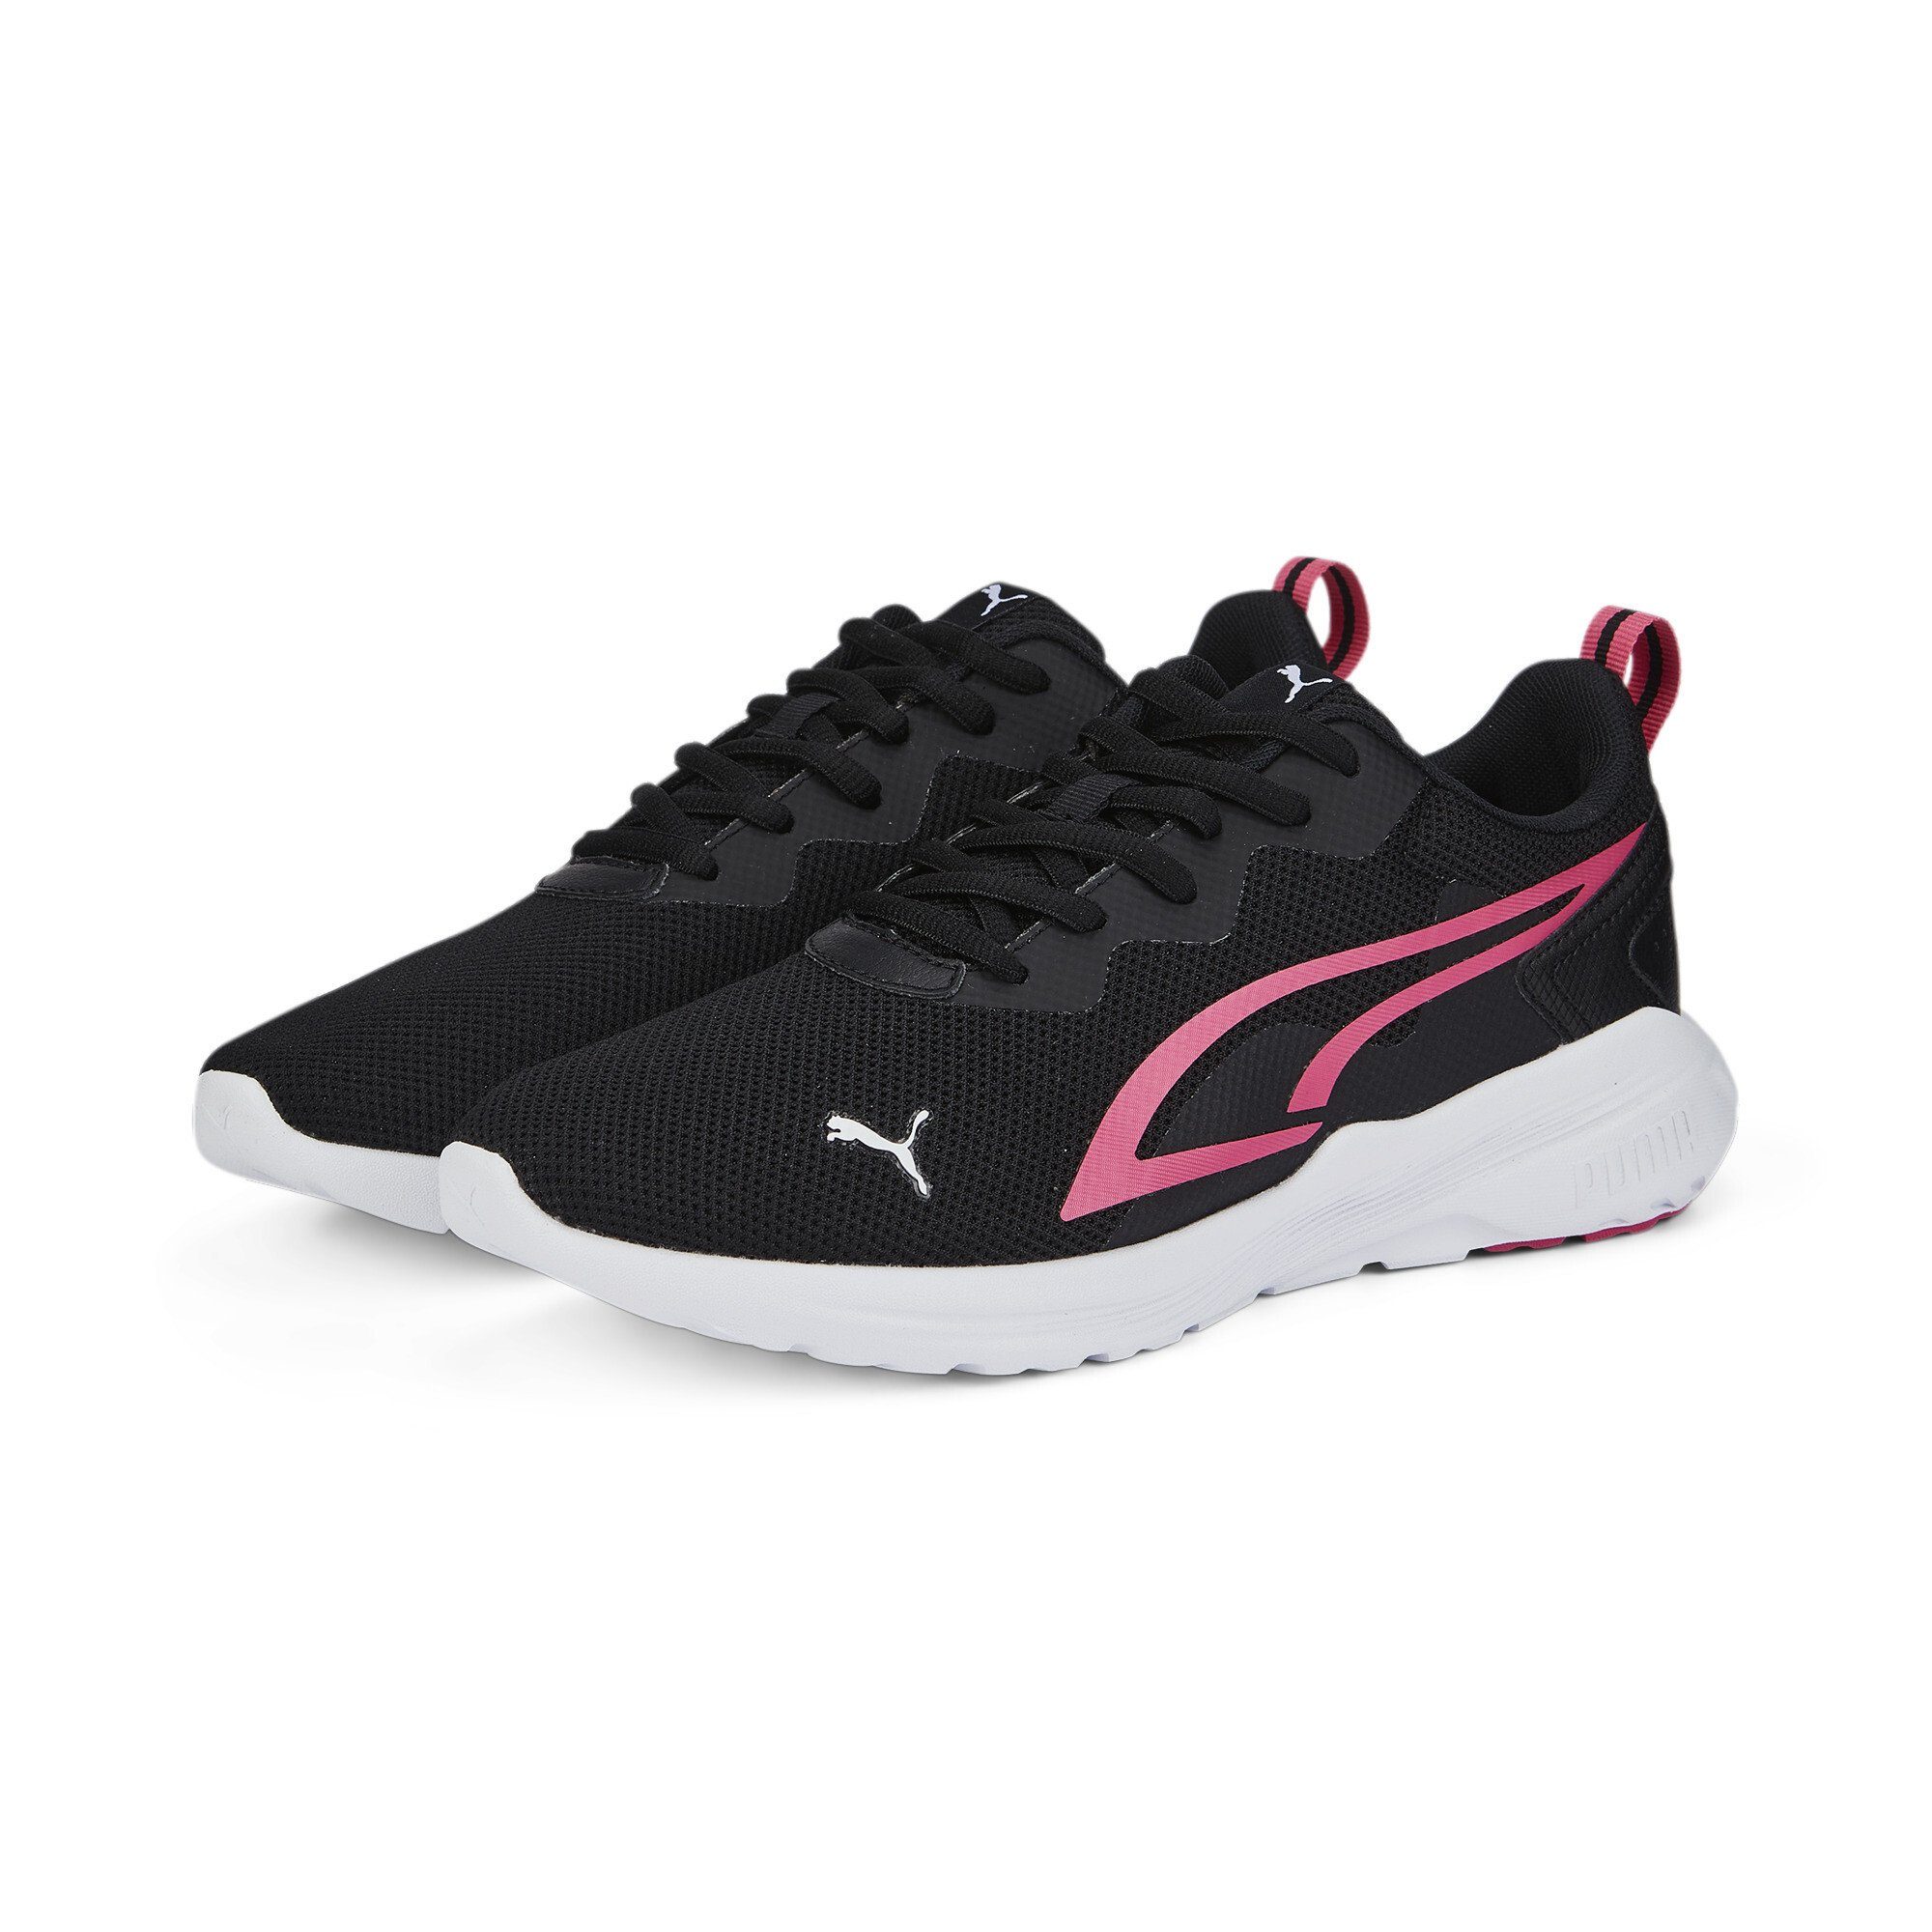 PUMA »All Day Active Sneakers« Sneaker online kaufen | OTTO